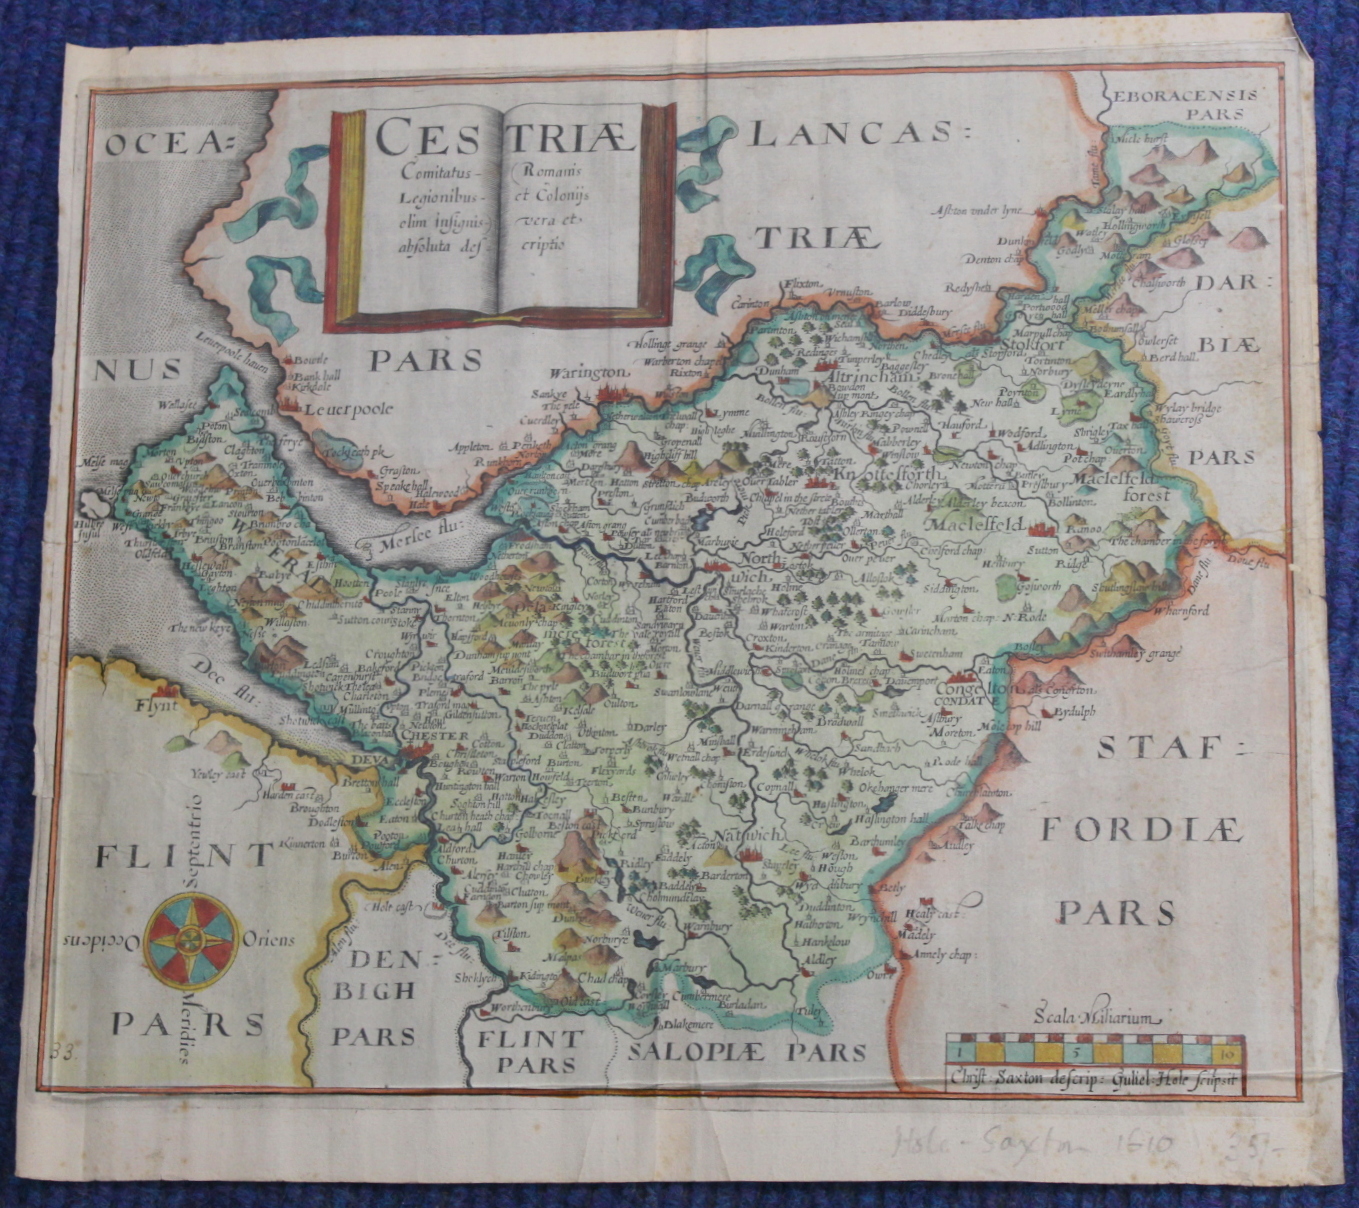 SAXTON CHRISTOPHER.  Cestriae (Cheshire). Antique hand coloured eng. map. 11" x 12", rolled, c.1610. - Image 5 of 27